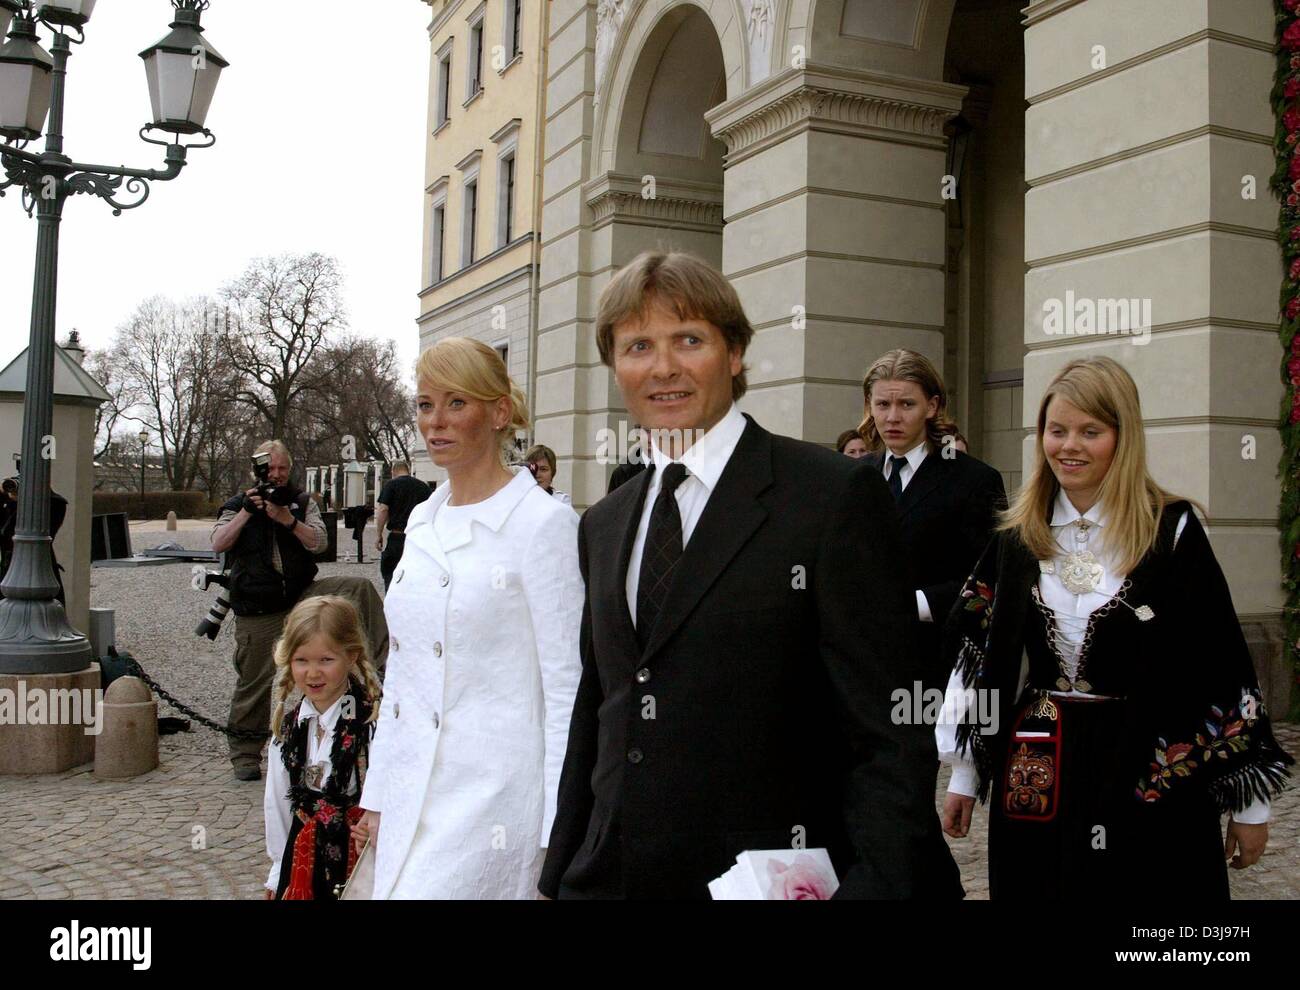 (dpa) - The brother of Crown Princess Mette-Marit of Norway (non identified) and his girlfriend arrive to the baptism of Mette-Marit's daughter, Princess Ingrid Alexandra, at the chapel of the royal castle in Oslo, Norway, 17 April 2004. Princess Ingrid Alexandra of Norway, the first child of Crown Prince Haakon (30), was christened three months after her birth and follows her fath Stock Photo